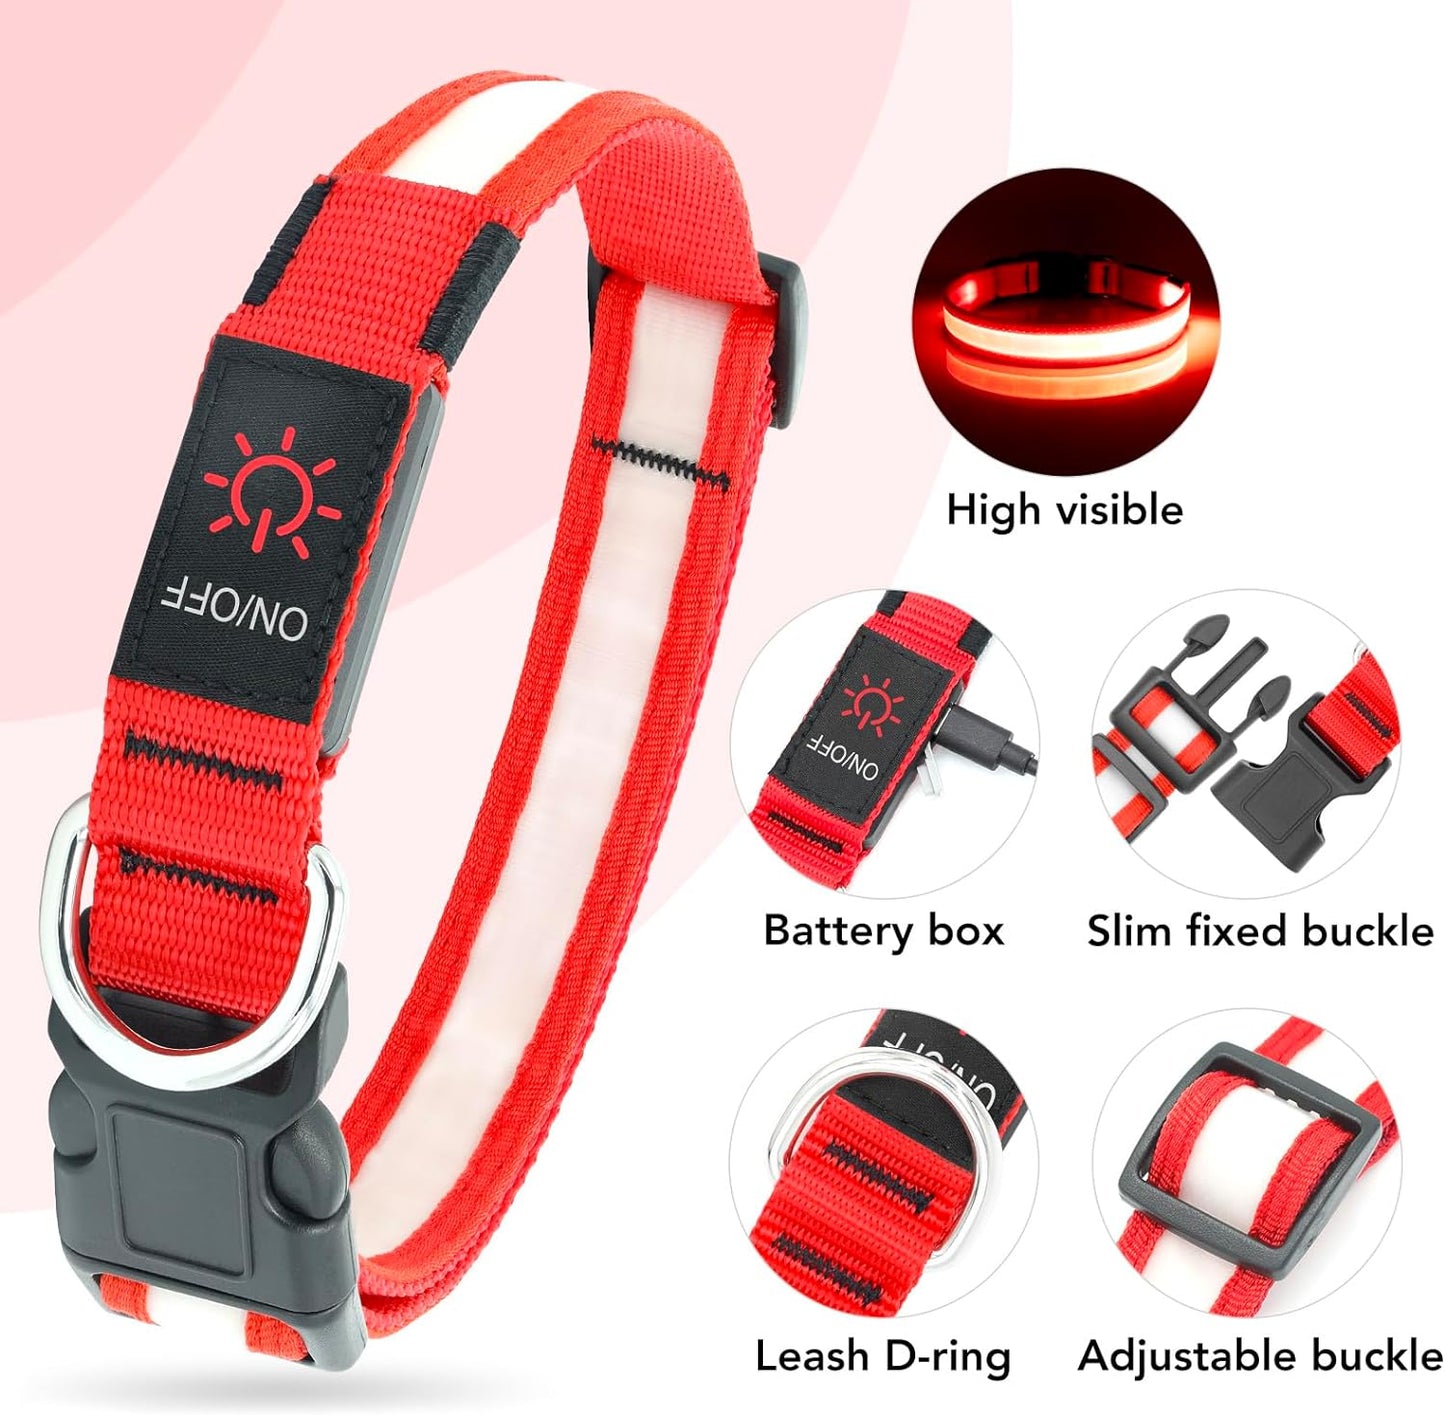 LED Dog Collar, Light up Dog Collar, Adjustable, USB Rechargeable, Super Bright Safety Light, Glowing Collars for Dogs